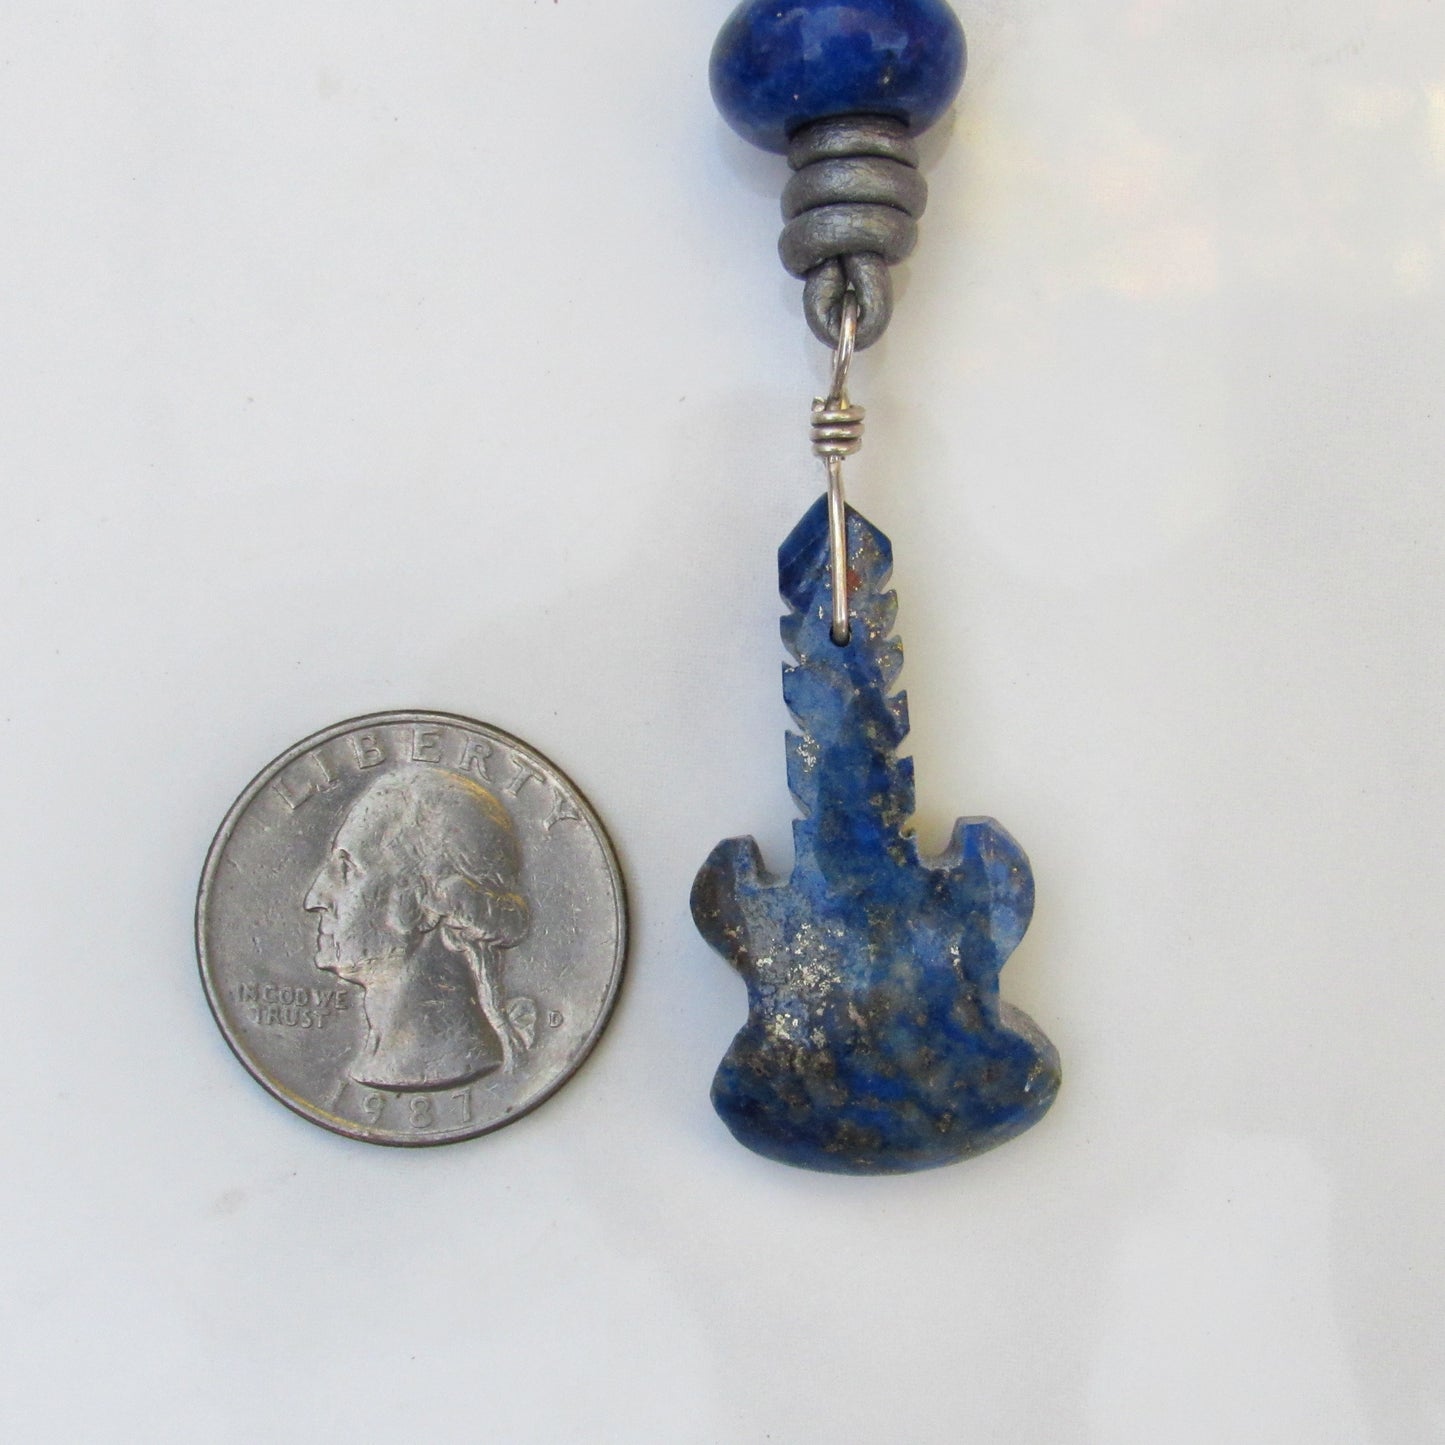 Blue Lapis Lazuli gemstone carved Guitar pendant on Hand Knotted Leather